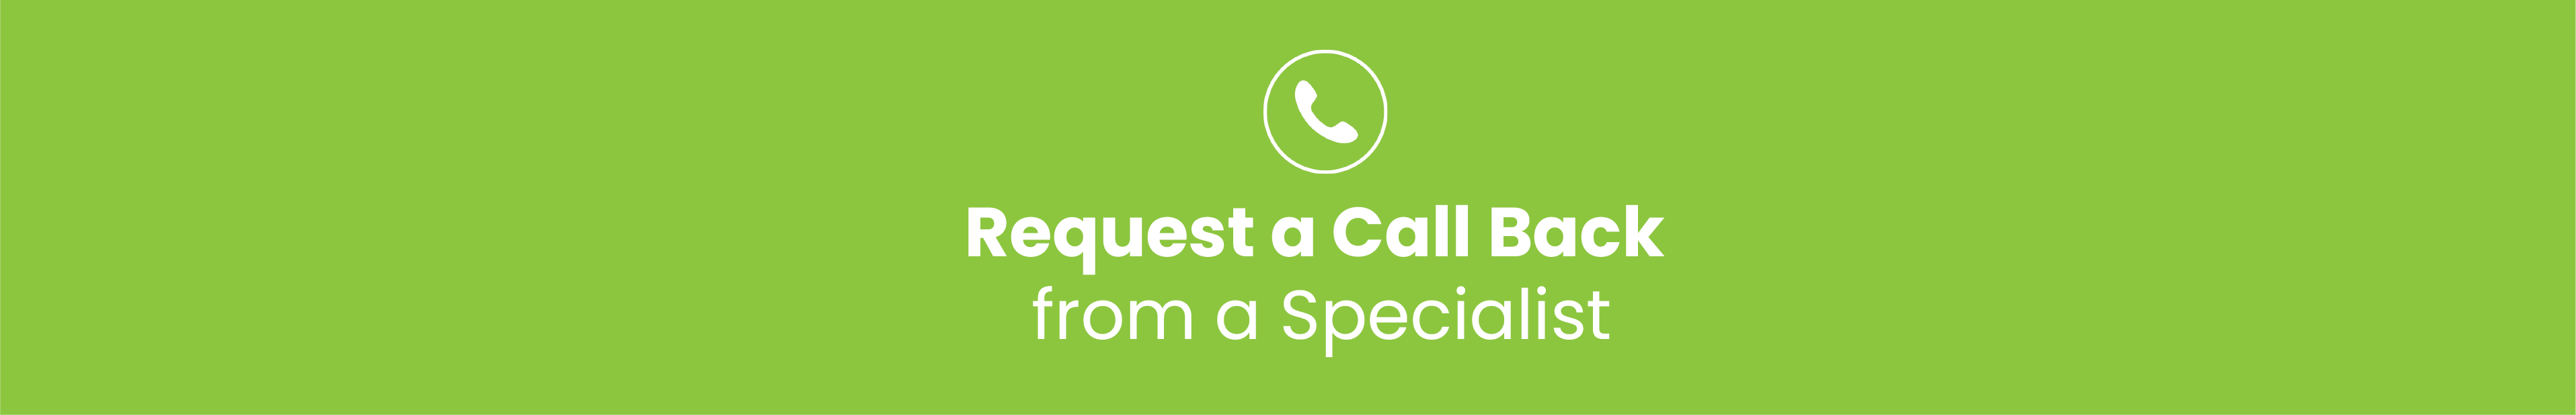 Request a Call Back from a Specialist